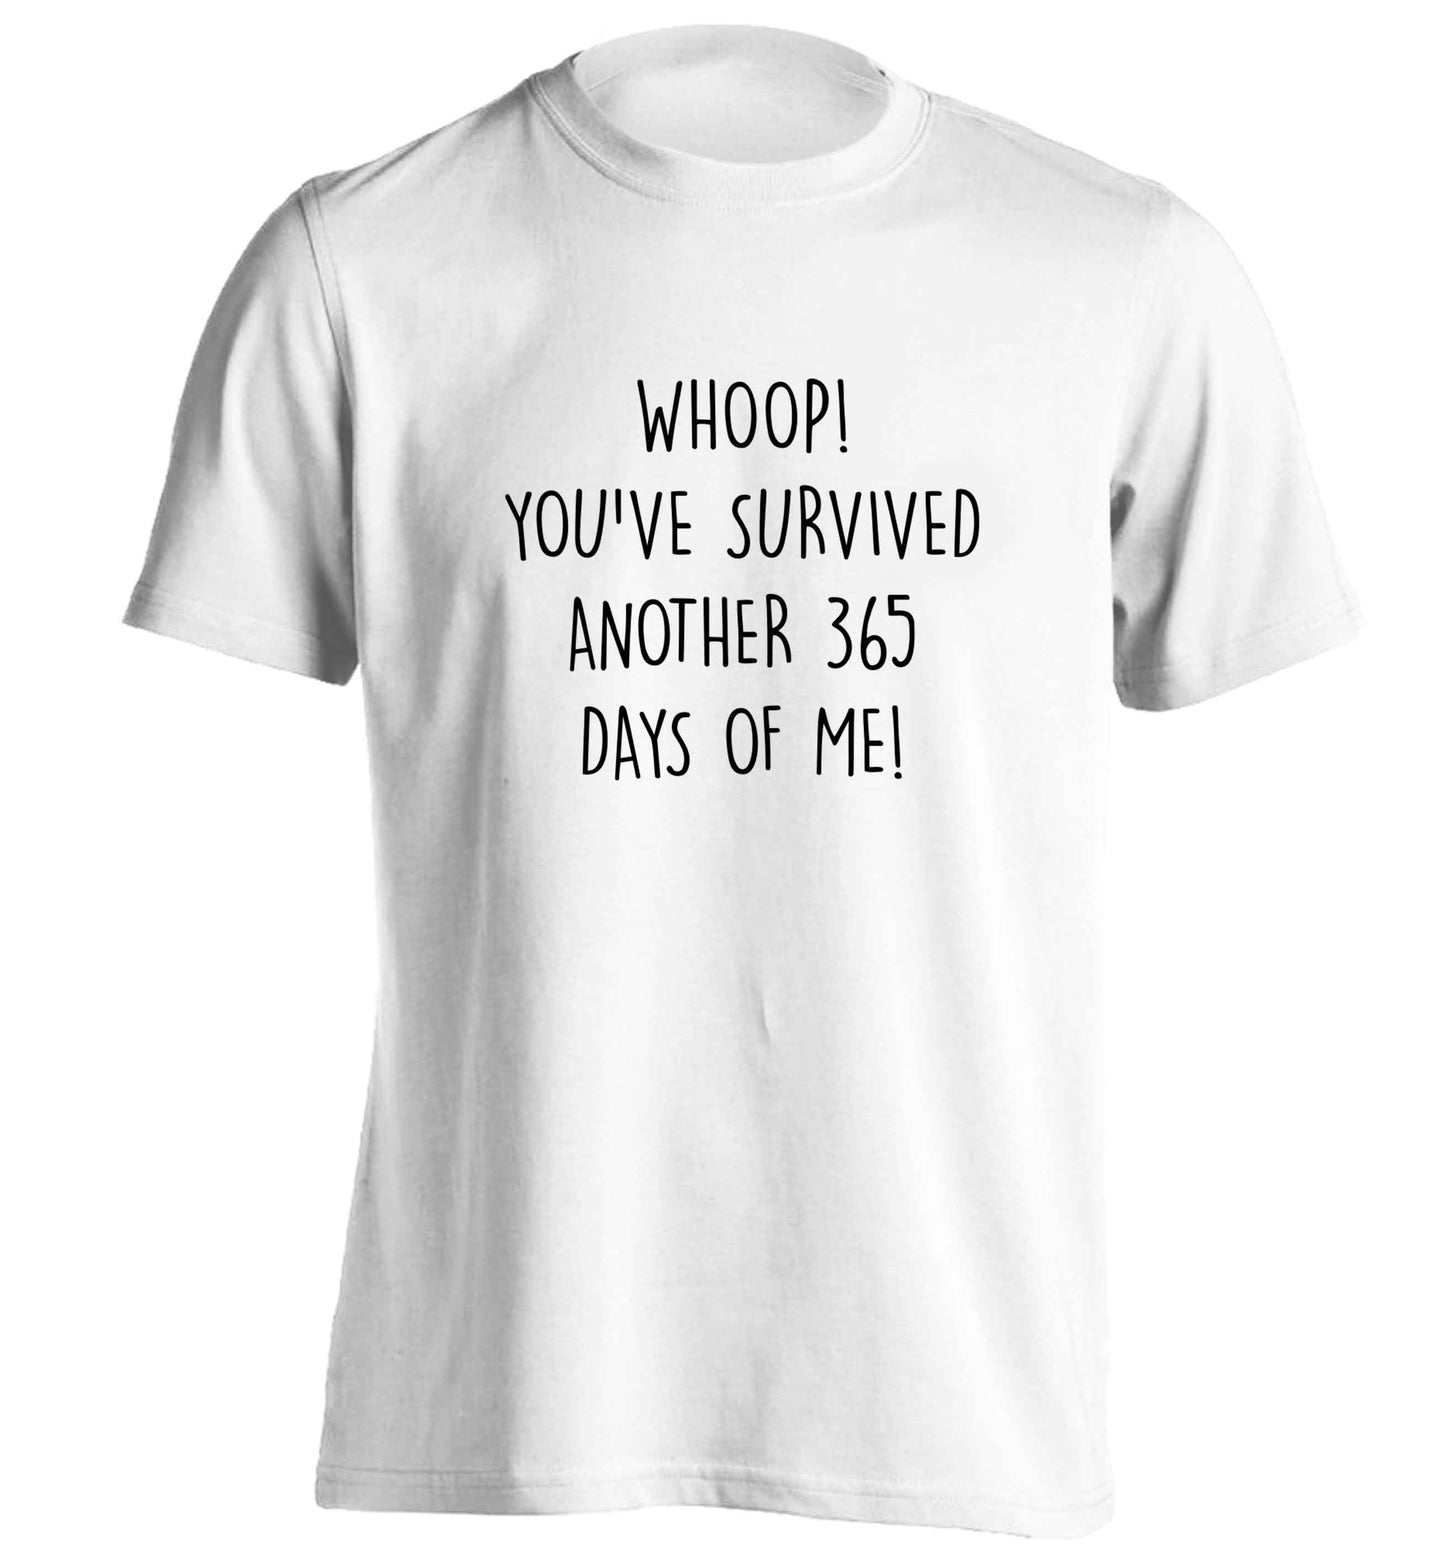 Whoop! You've survived another 365 days with me! adults unisex white Tshirt 2XL